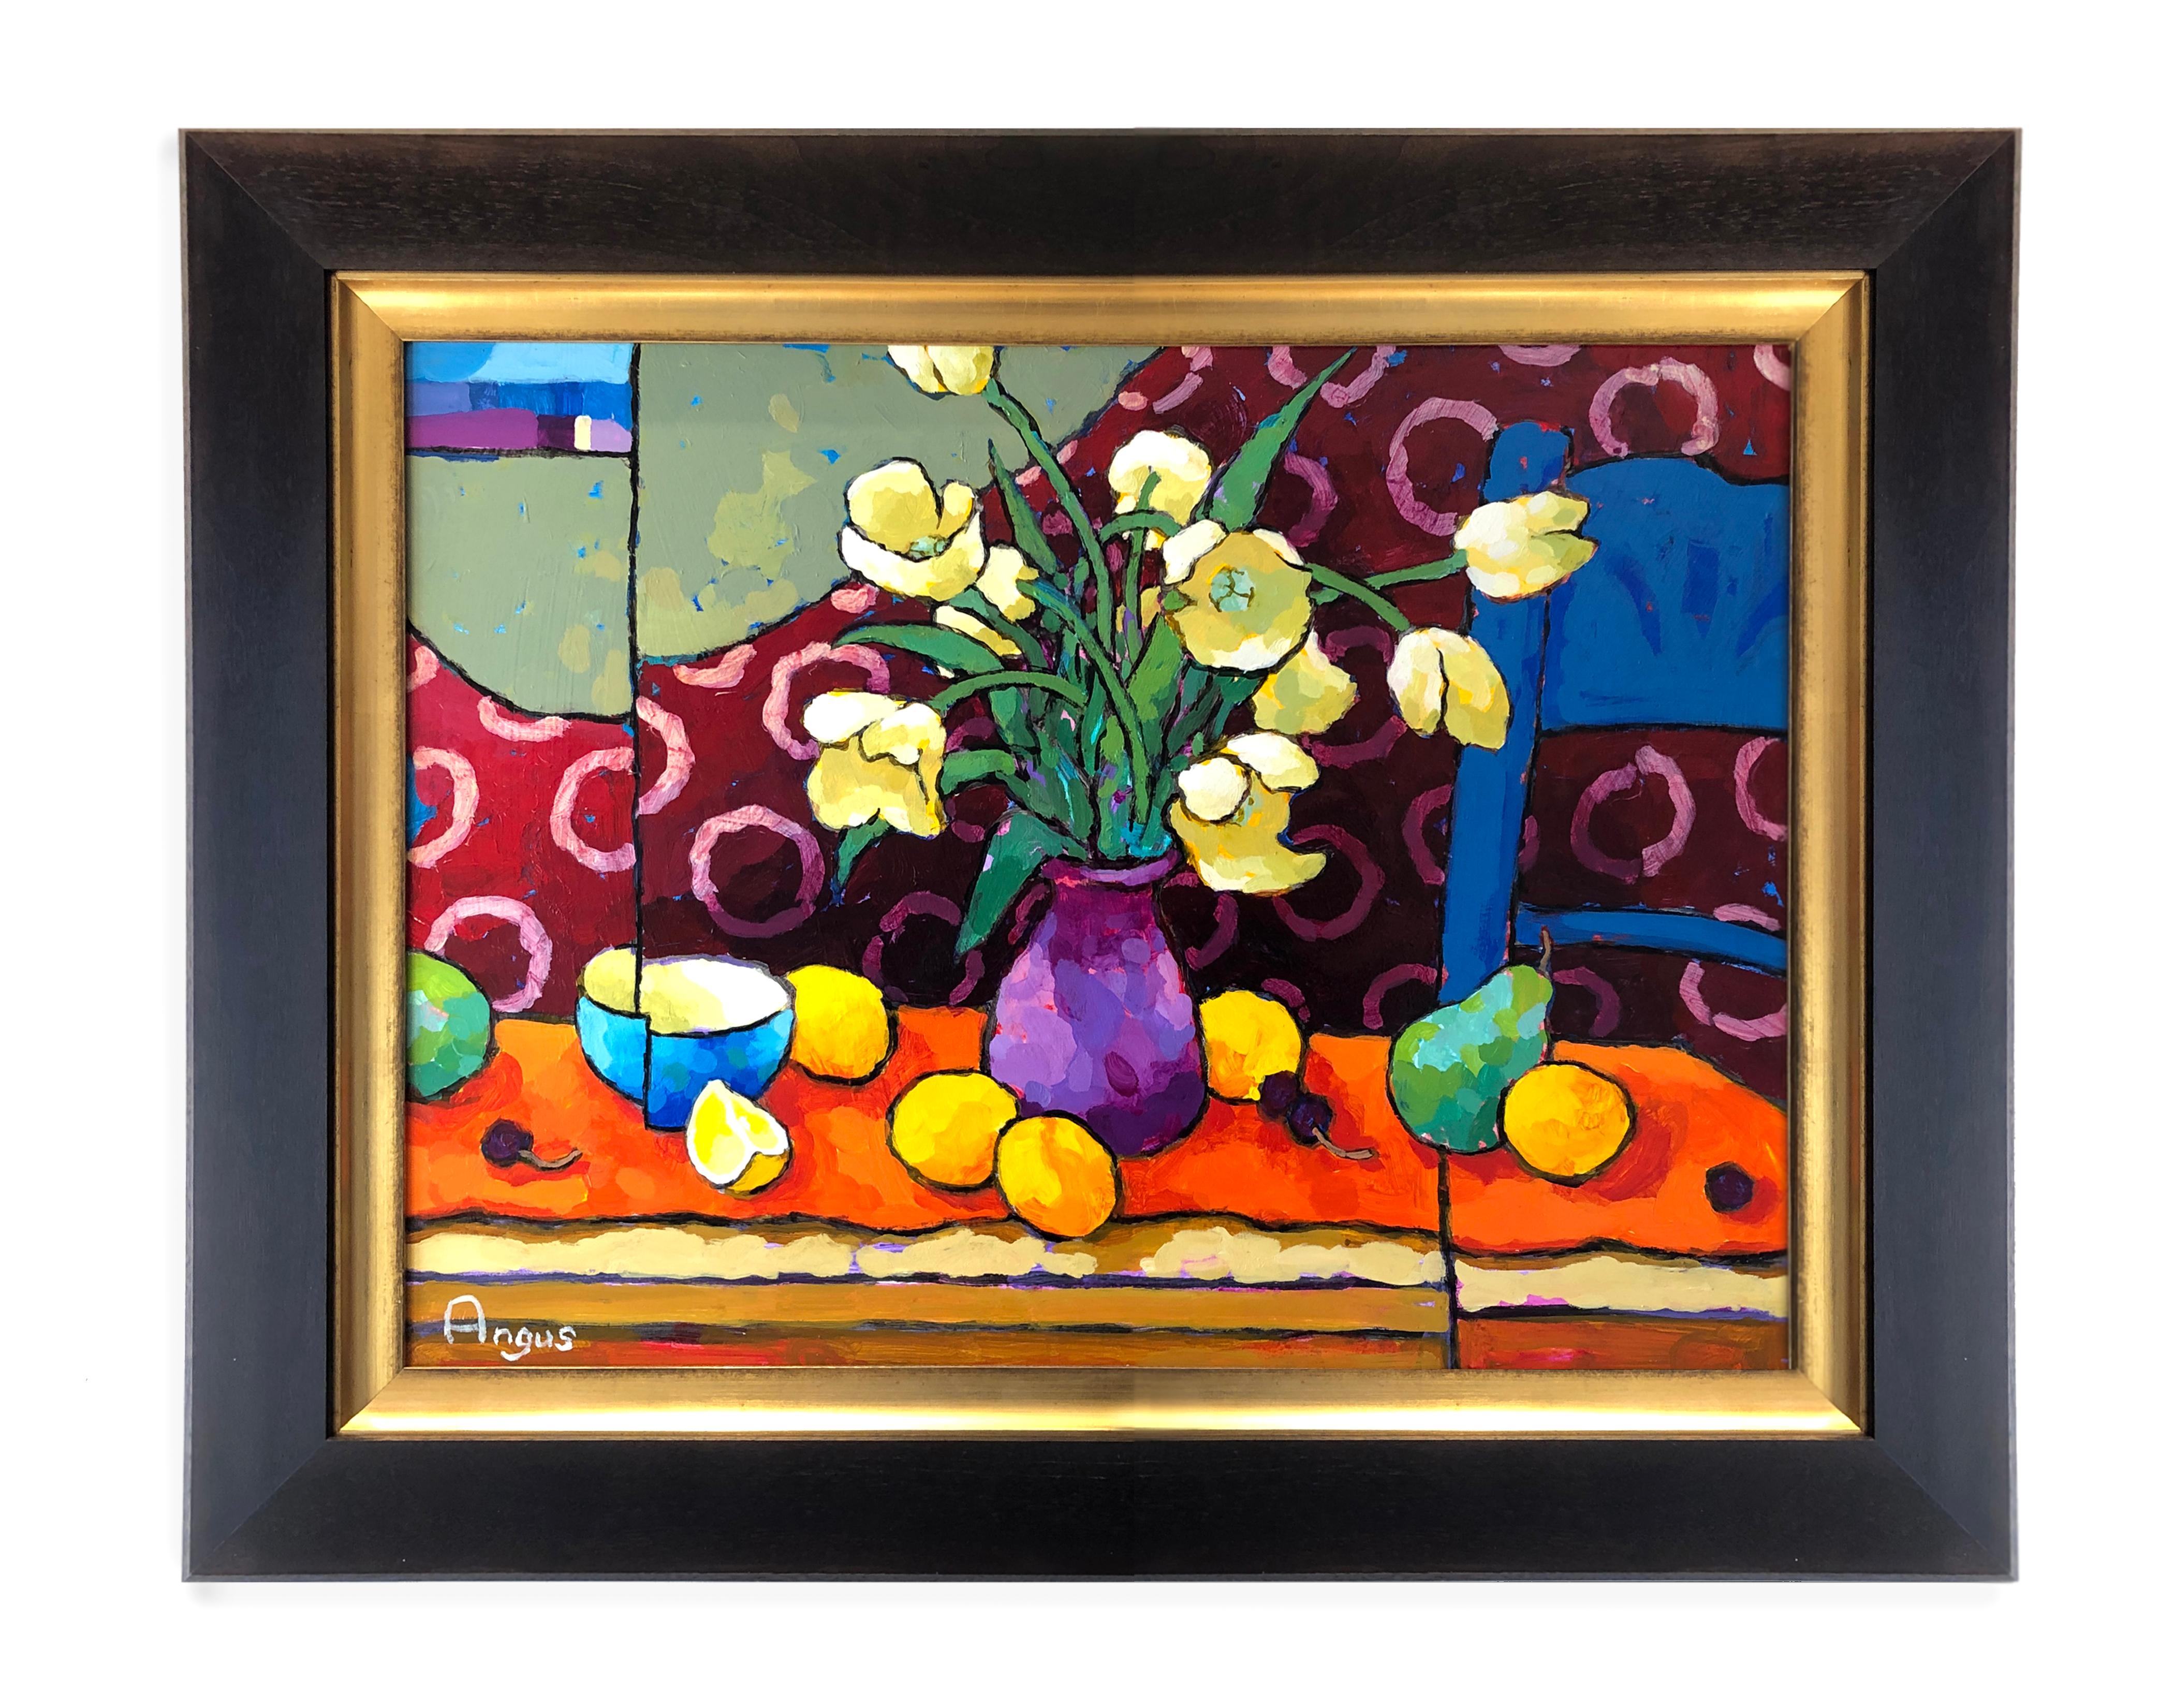 Tulips over Red & Orange with Blue Chair (still life, fruit, yellow tulips) 4